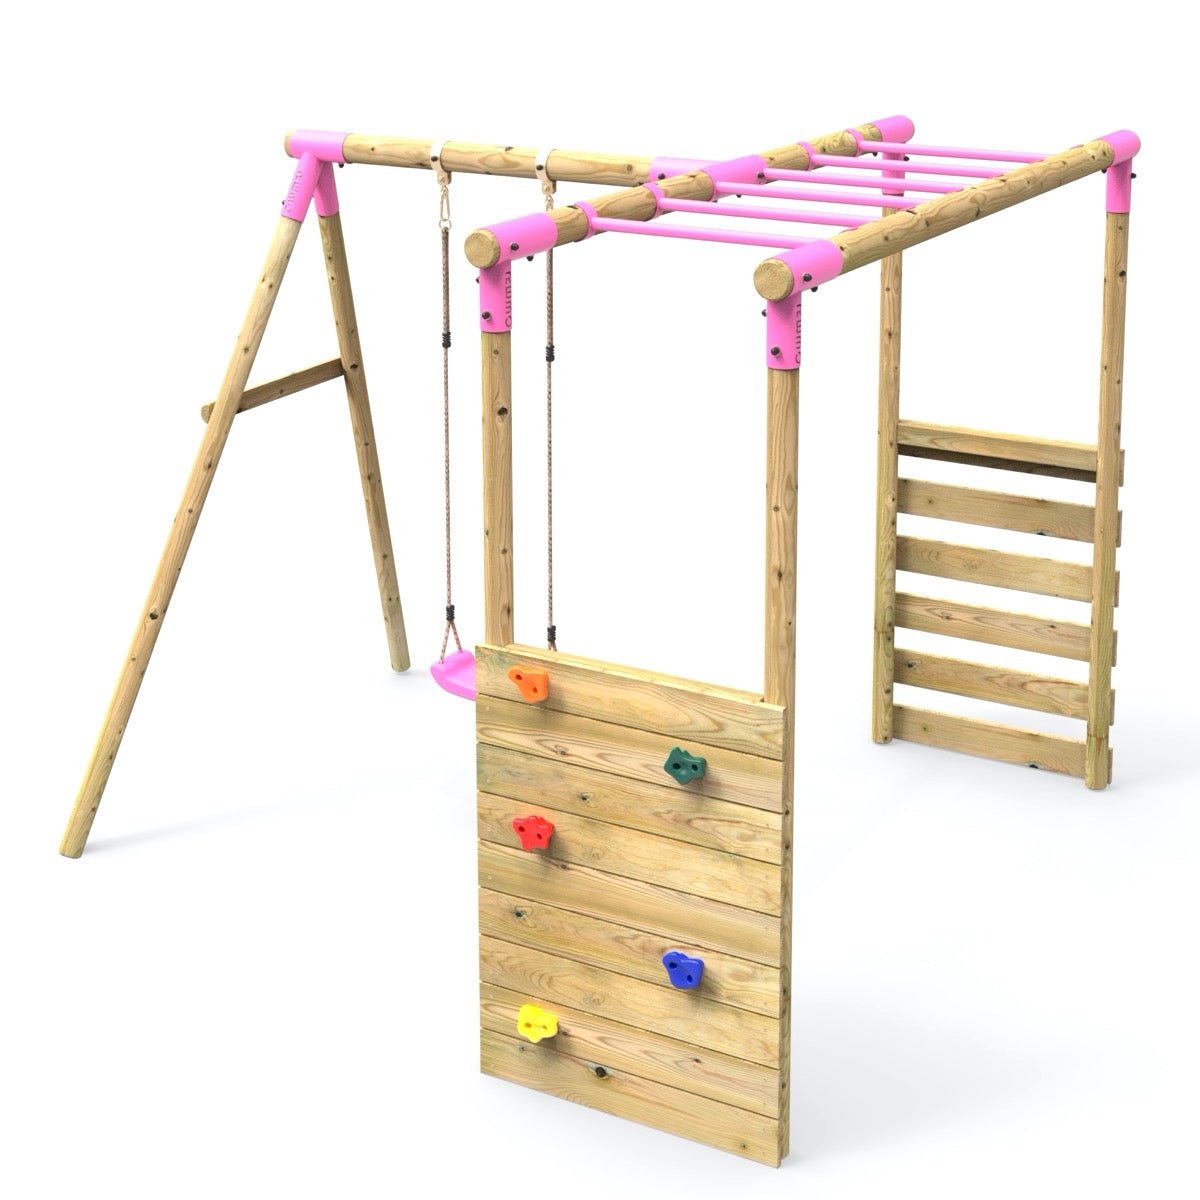 Rebo Wooden Garden Swing Set with Extra-Long Monkey Bars - Solar Pink